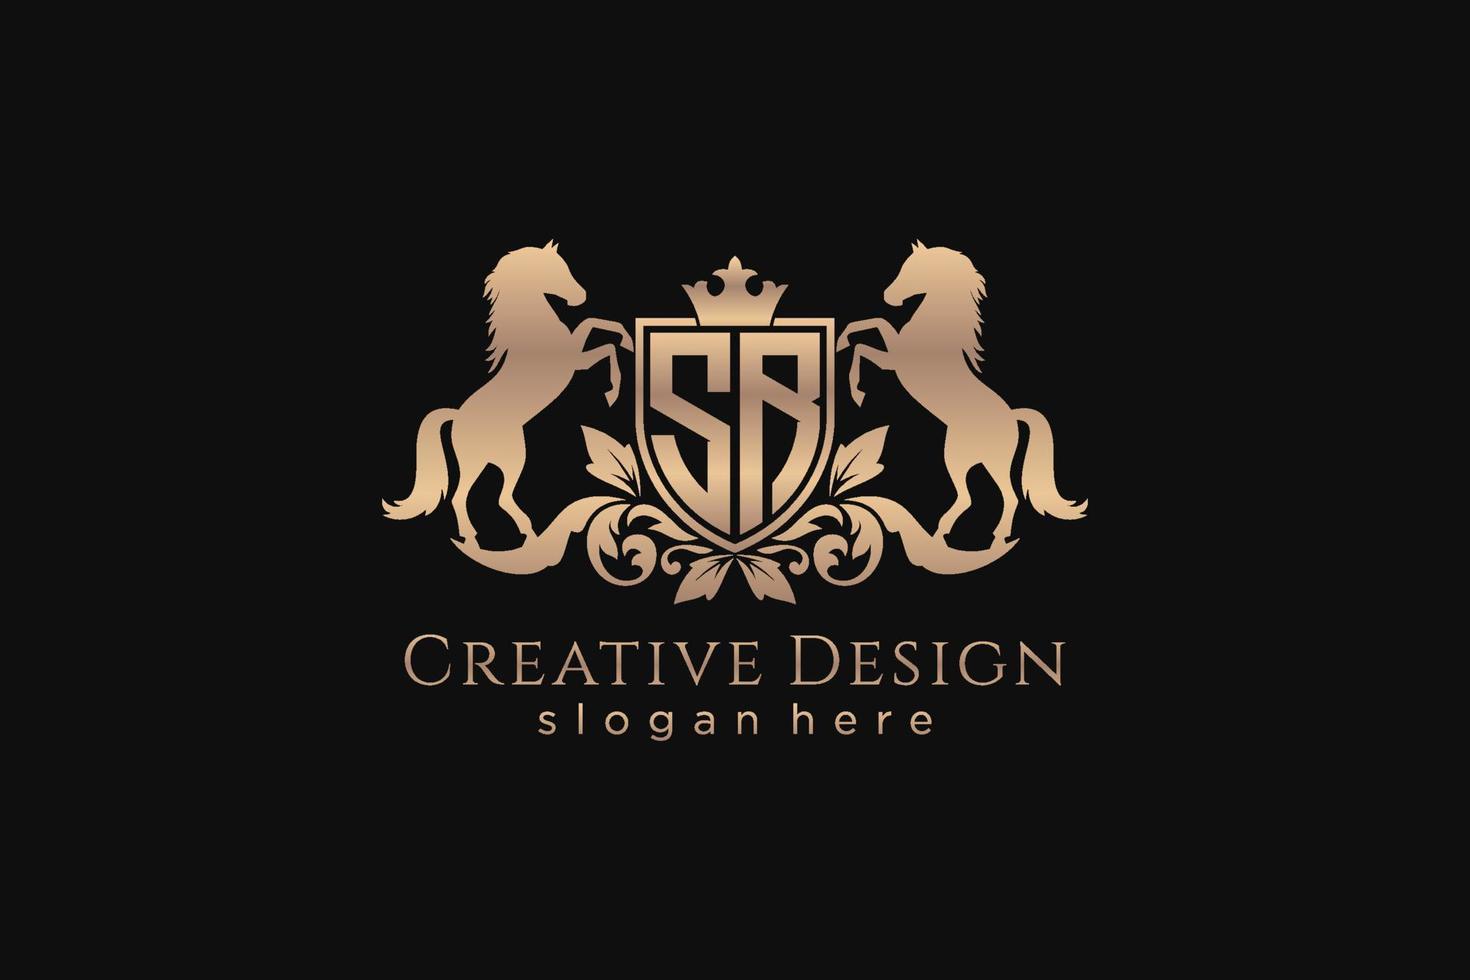 initial SR Retro golden crest with shield and two horses, badge template with scrolls and royal crown - perfect for luxurious branding projects vector